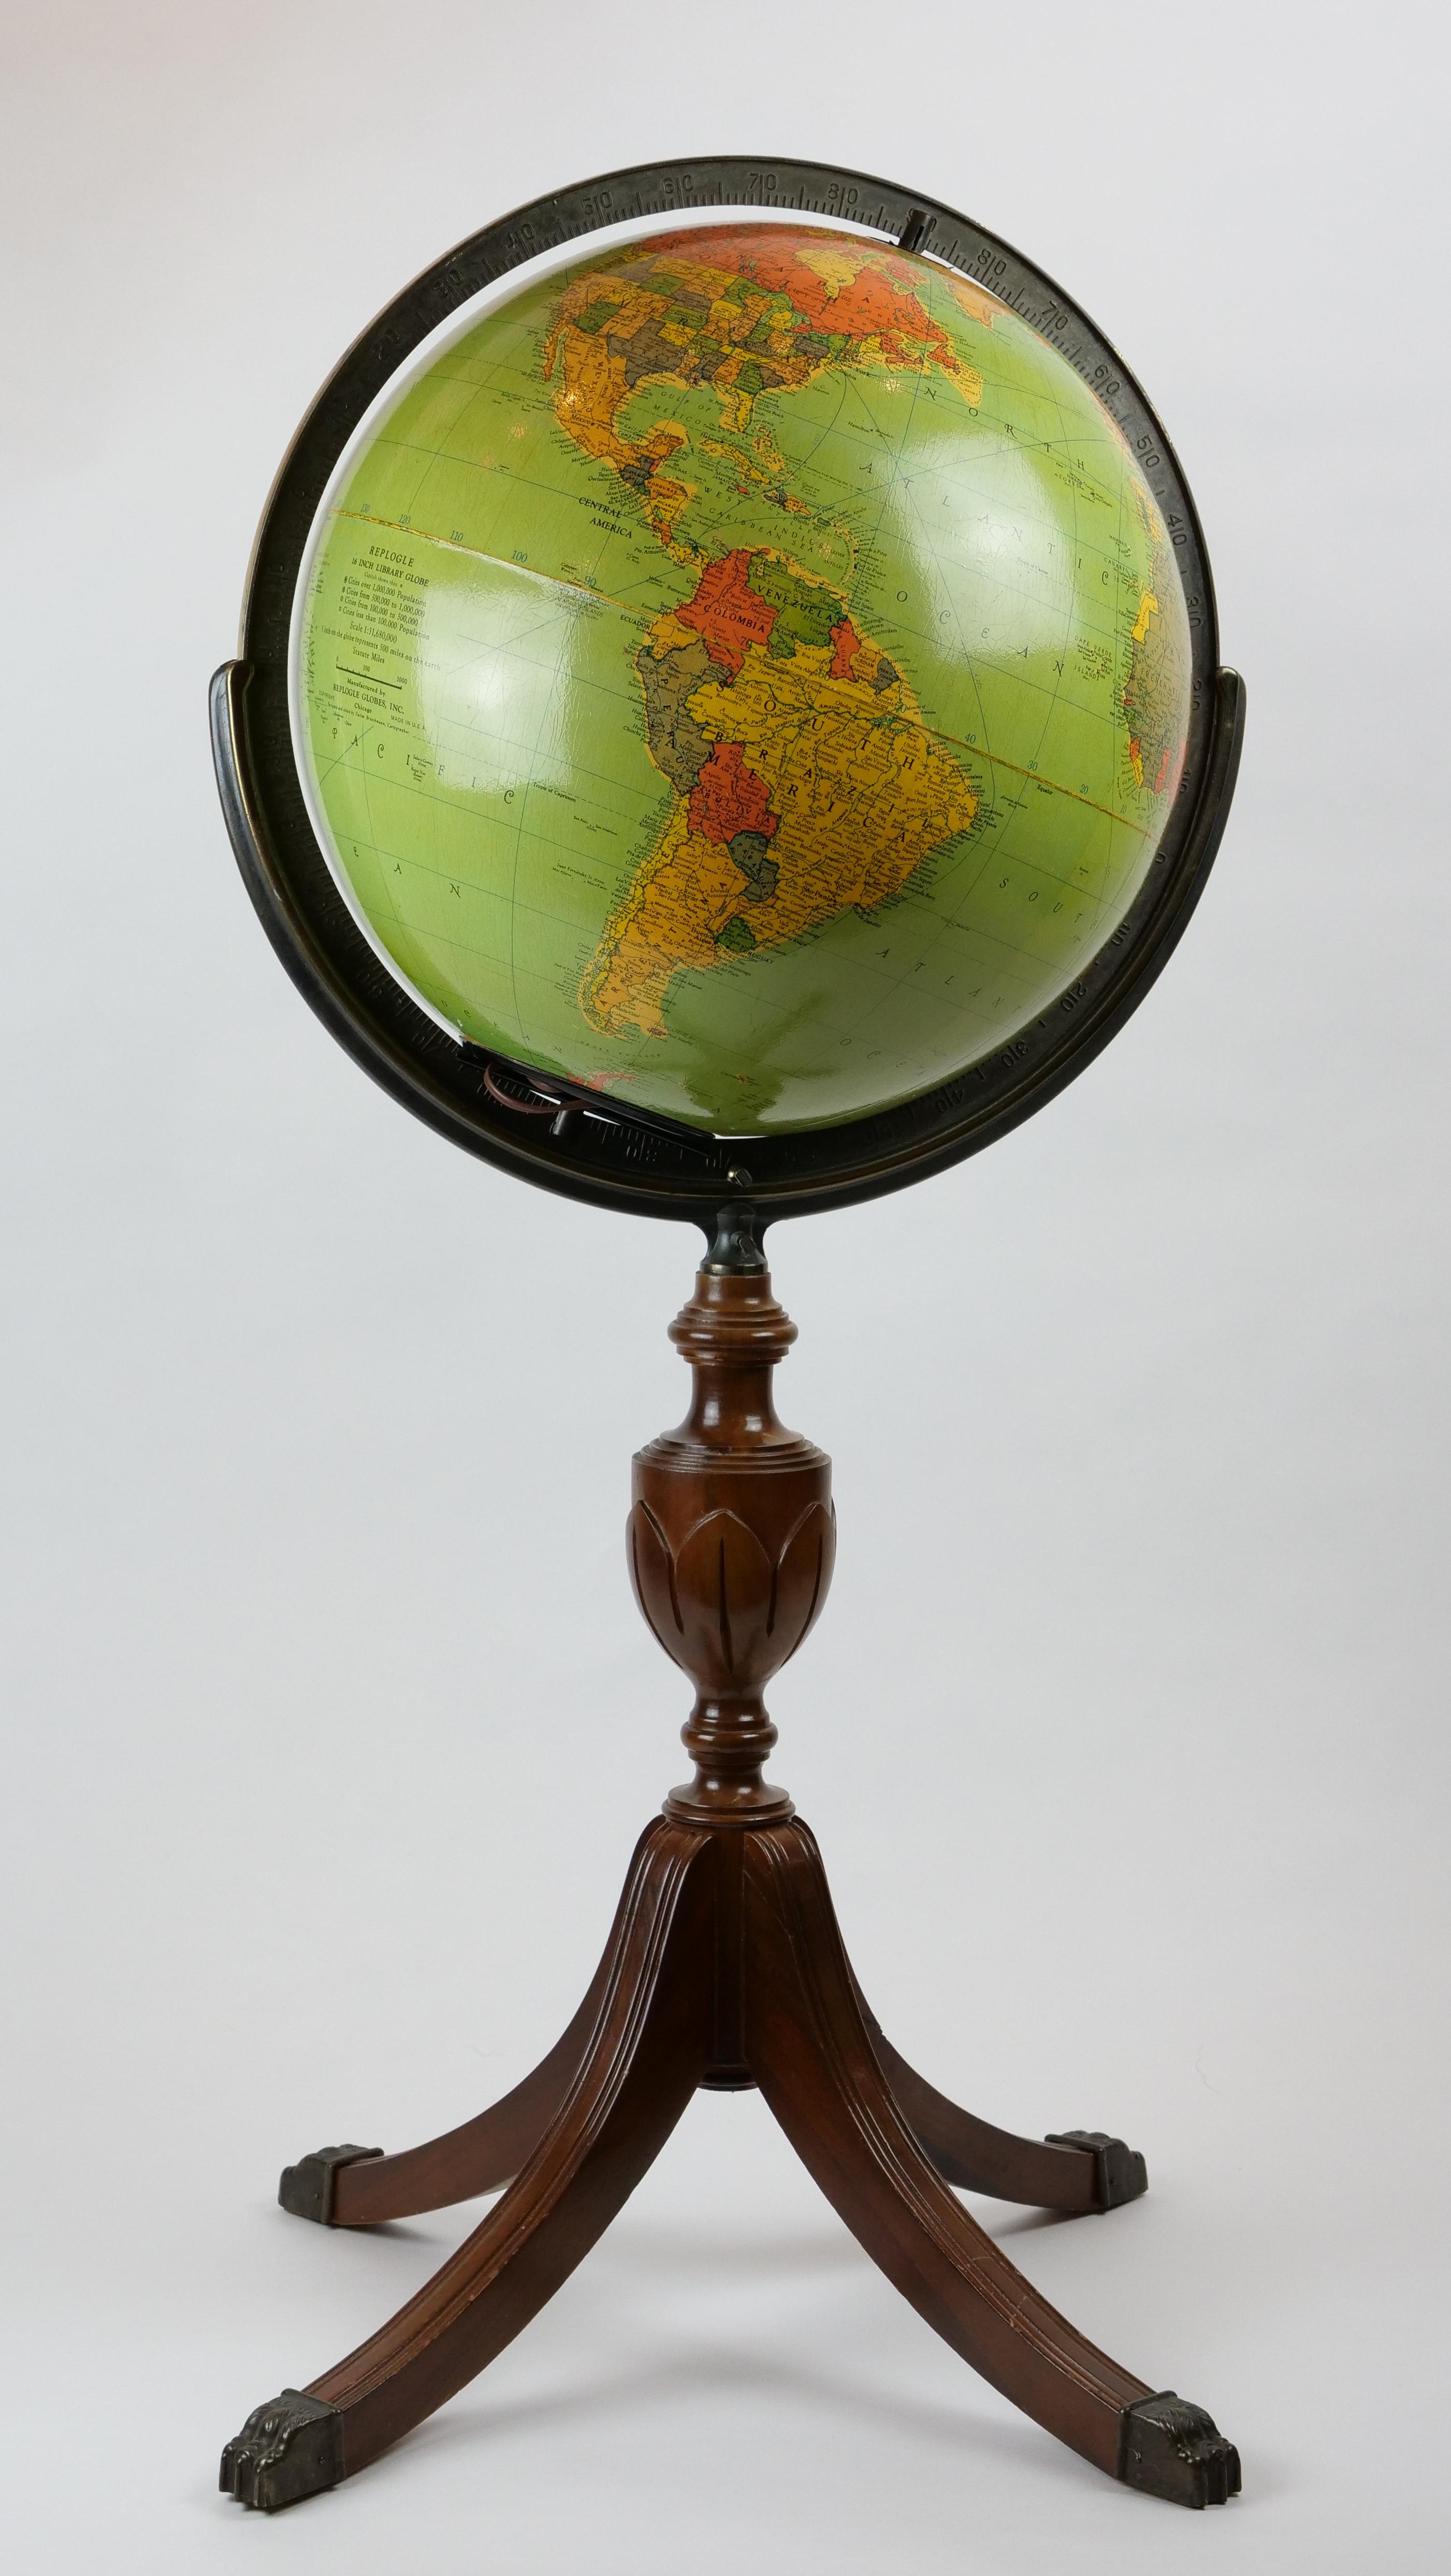 Mid-20th century wood and glass 16 inch standing library globe with interior light by Replongle Globes.